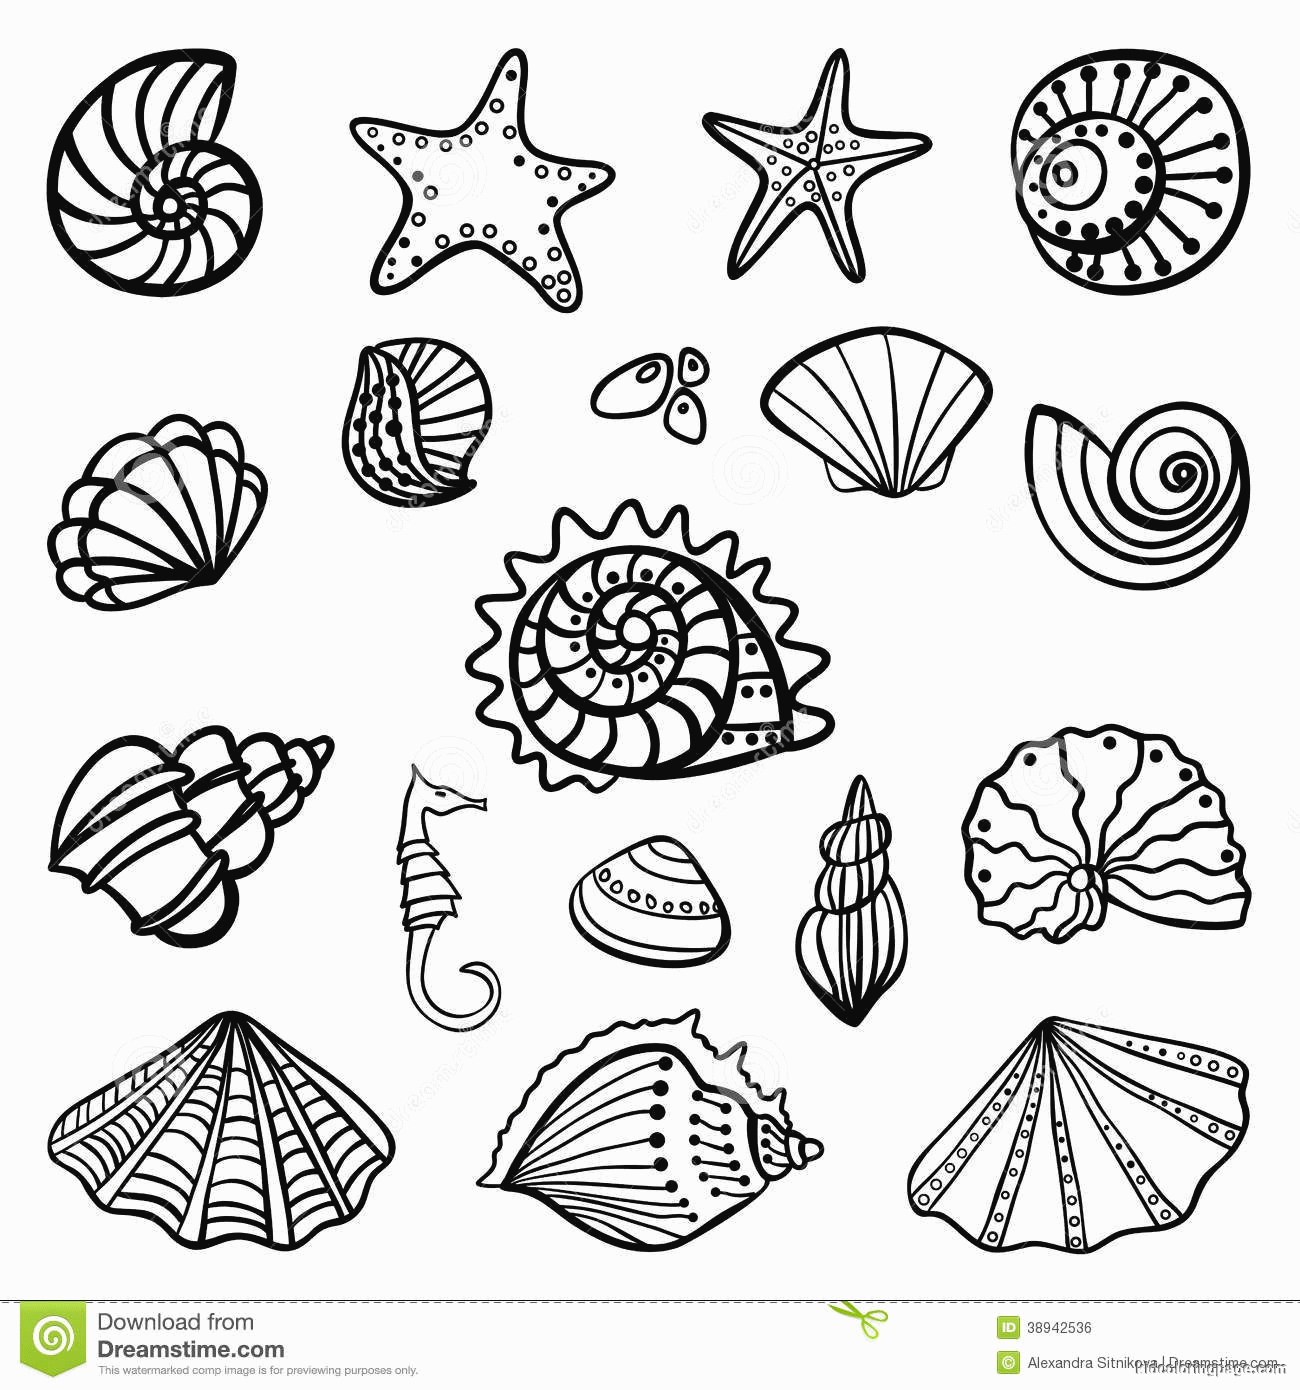 Seashell Printable Coloring Pages - Coloring Home